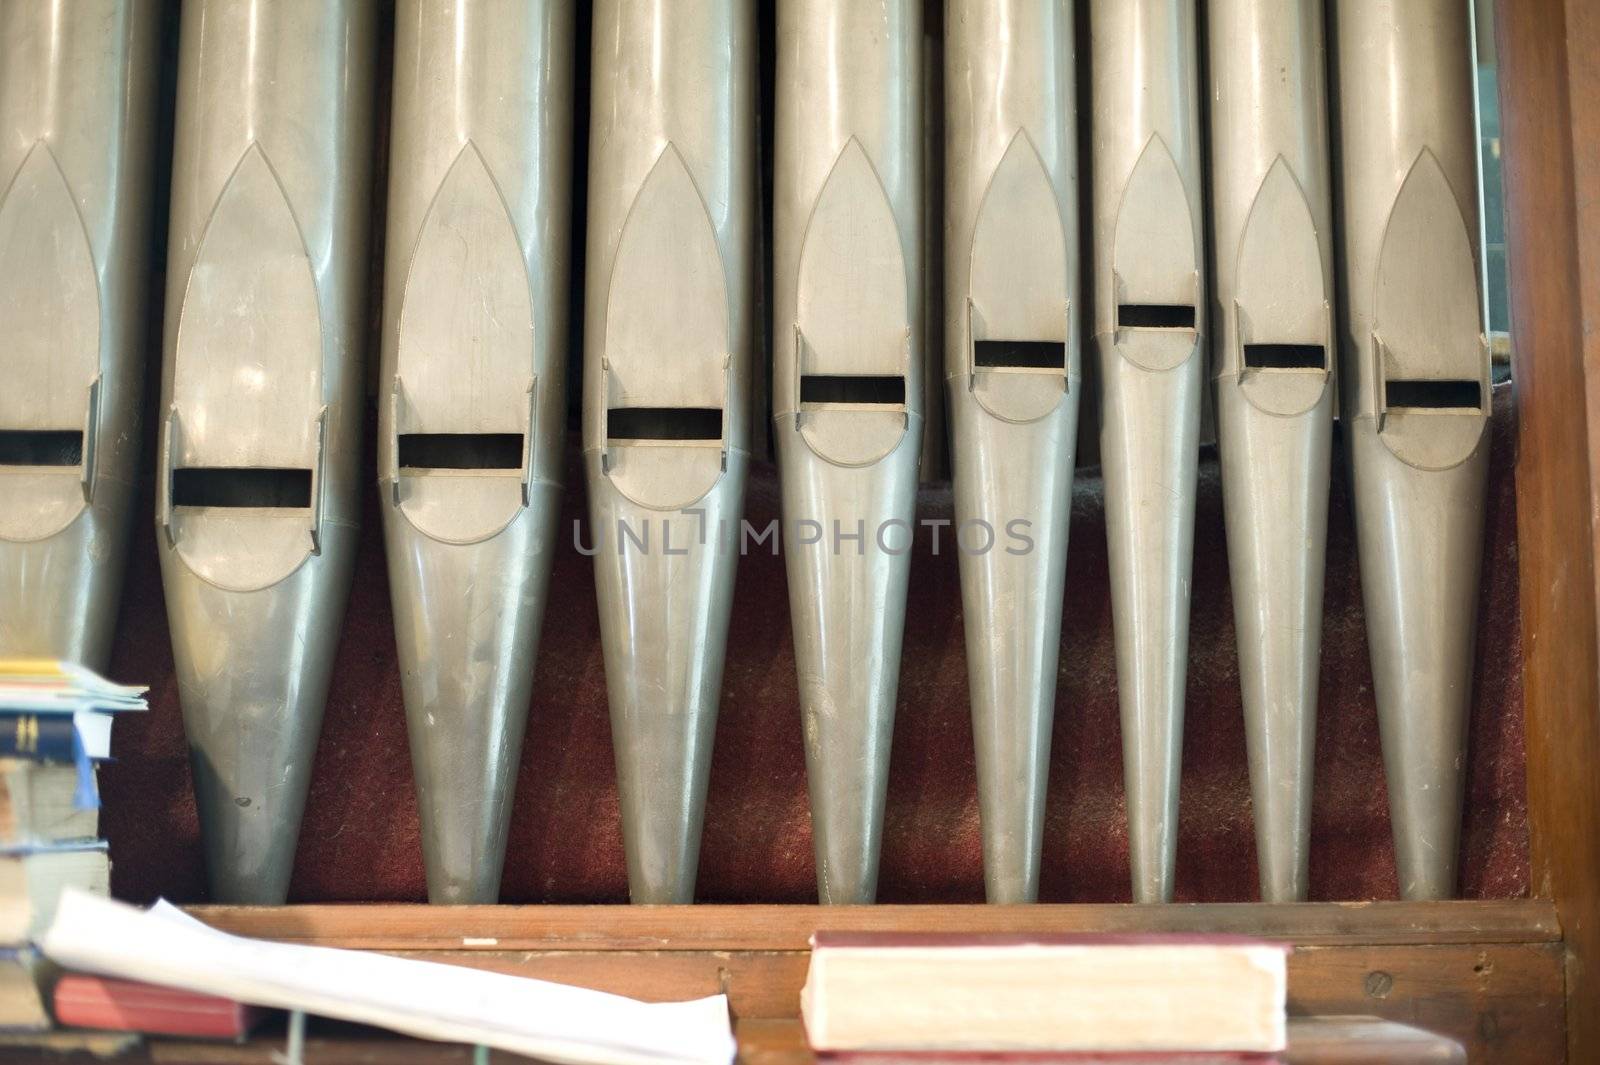 organ pipes and a pile of music book at the from of a small church organ